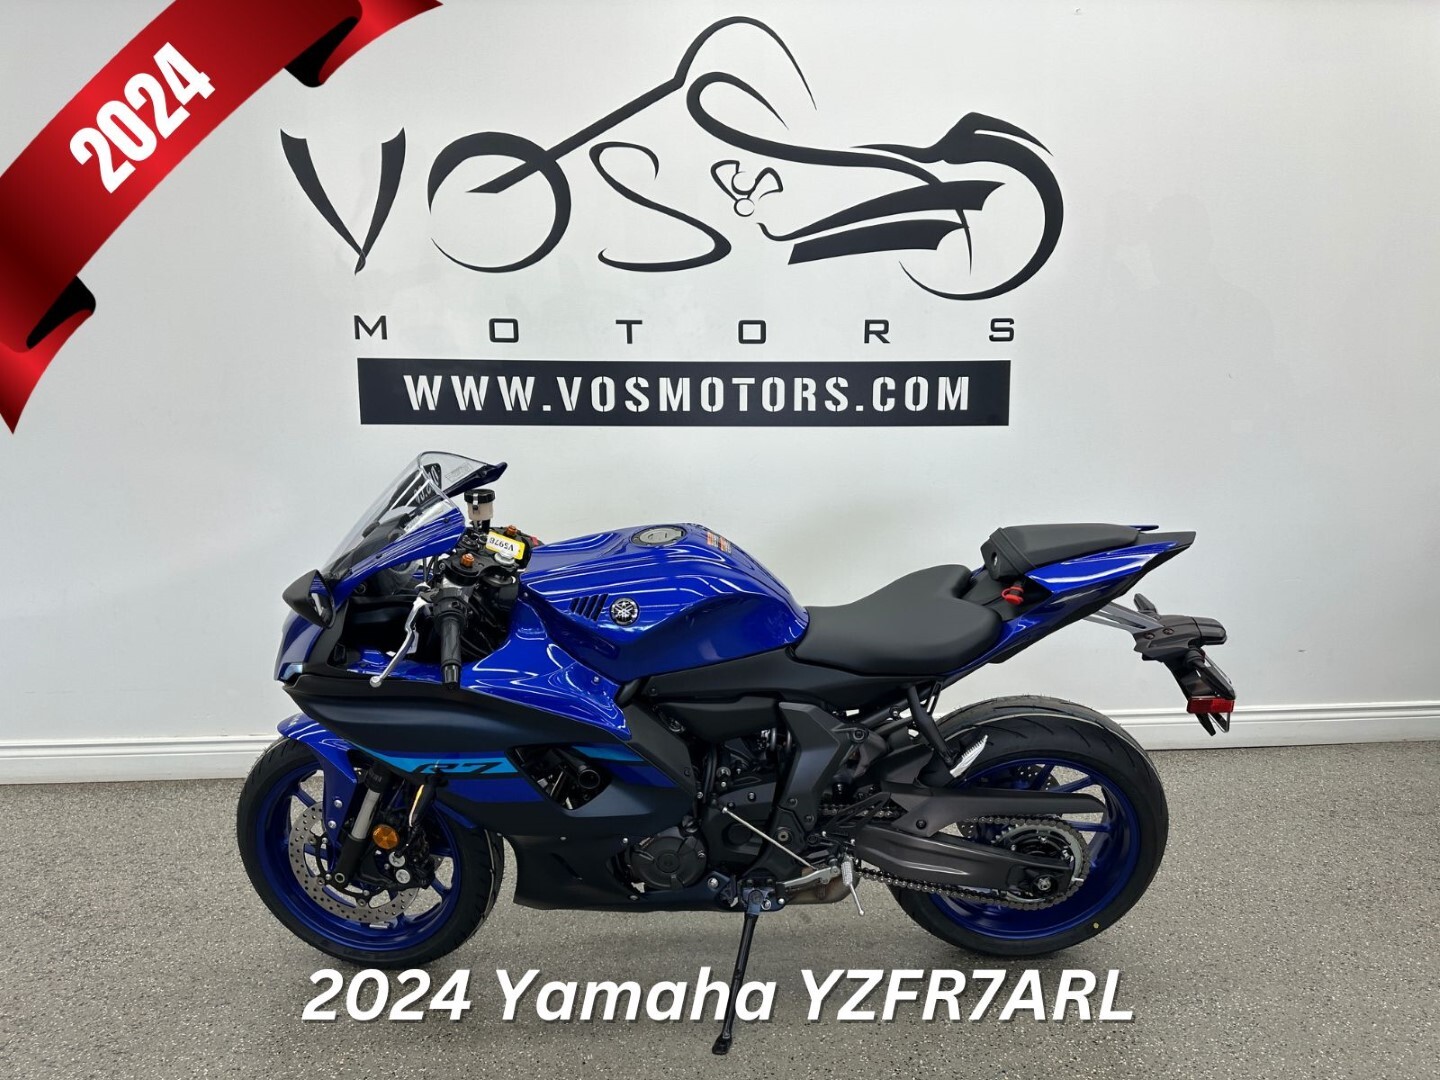 2024 Yamaha YZFR7ARL YZFR7ARL - V6028NP - -No Payments for 1 Year**